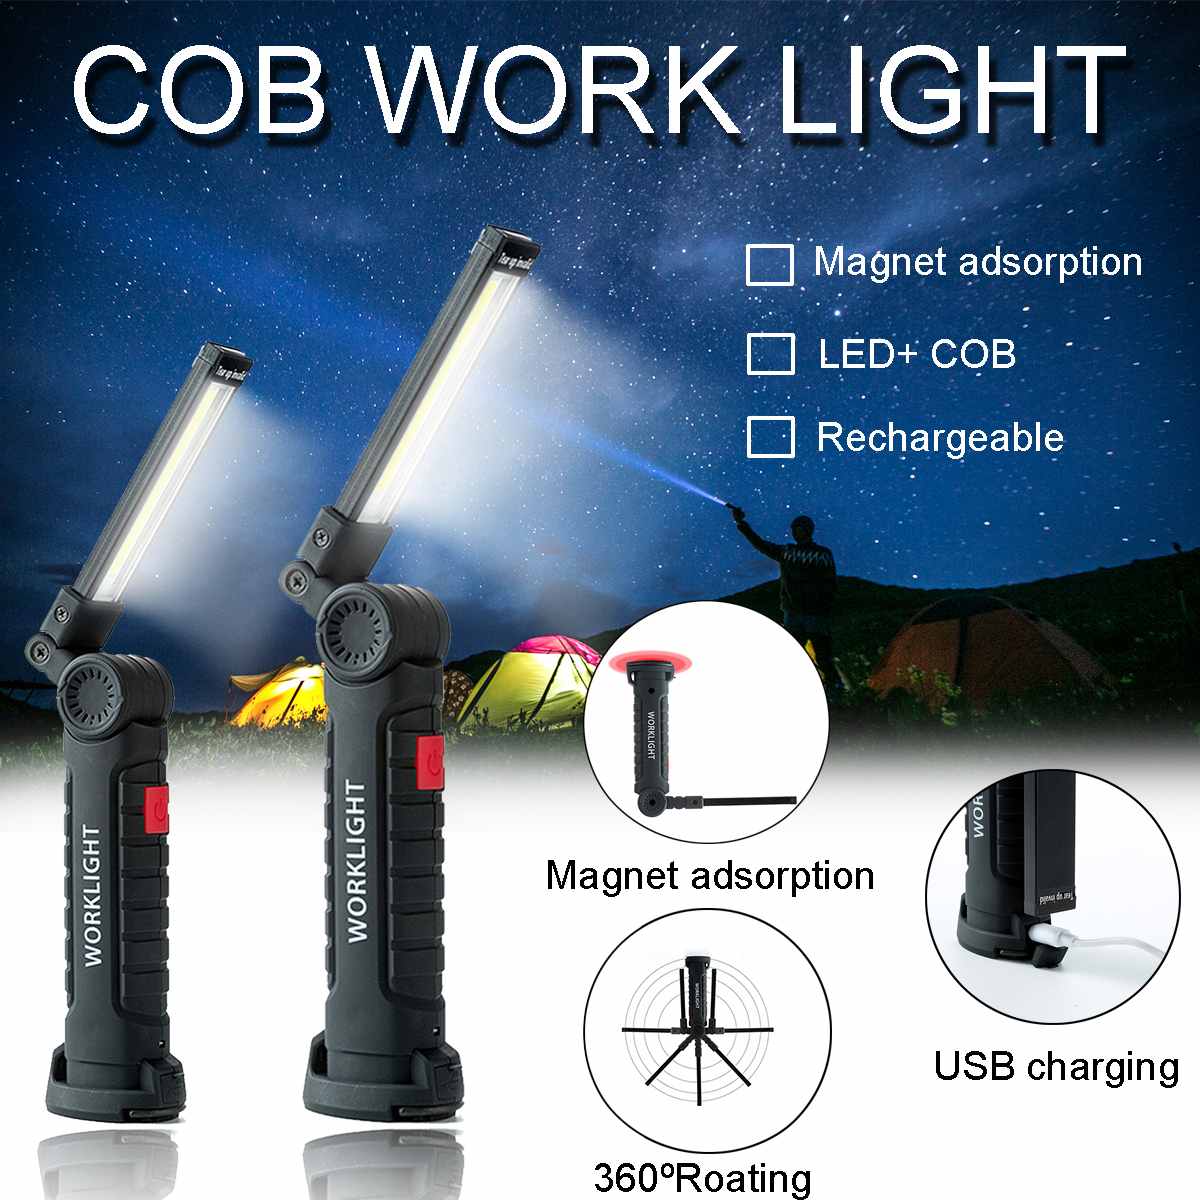 LED COB Rechargeable Work Light Magnetic Torch Flexible Cordless Inspection Lamp 